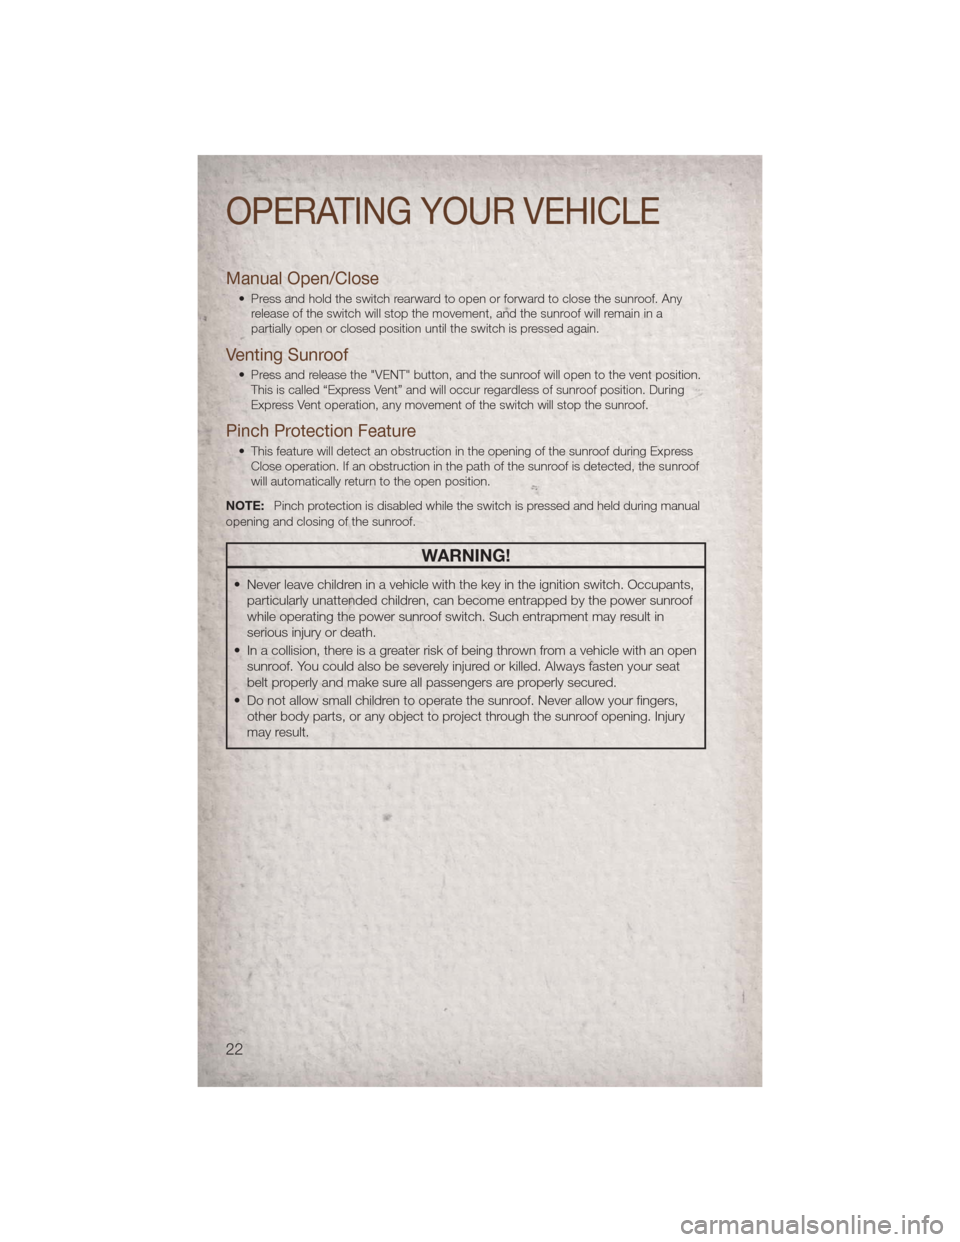 JEEP PATRIOT 2011 1.G Owners Manual Manual Open/Close
• Press and hold the switch rearward to open or forward to close the sunroof. Anyrelease of the switch will stop the movement, and the sunroof will remain in a
partially open or cl